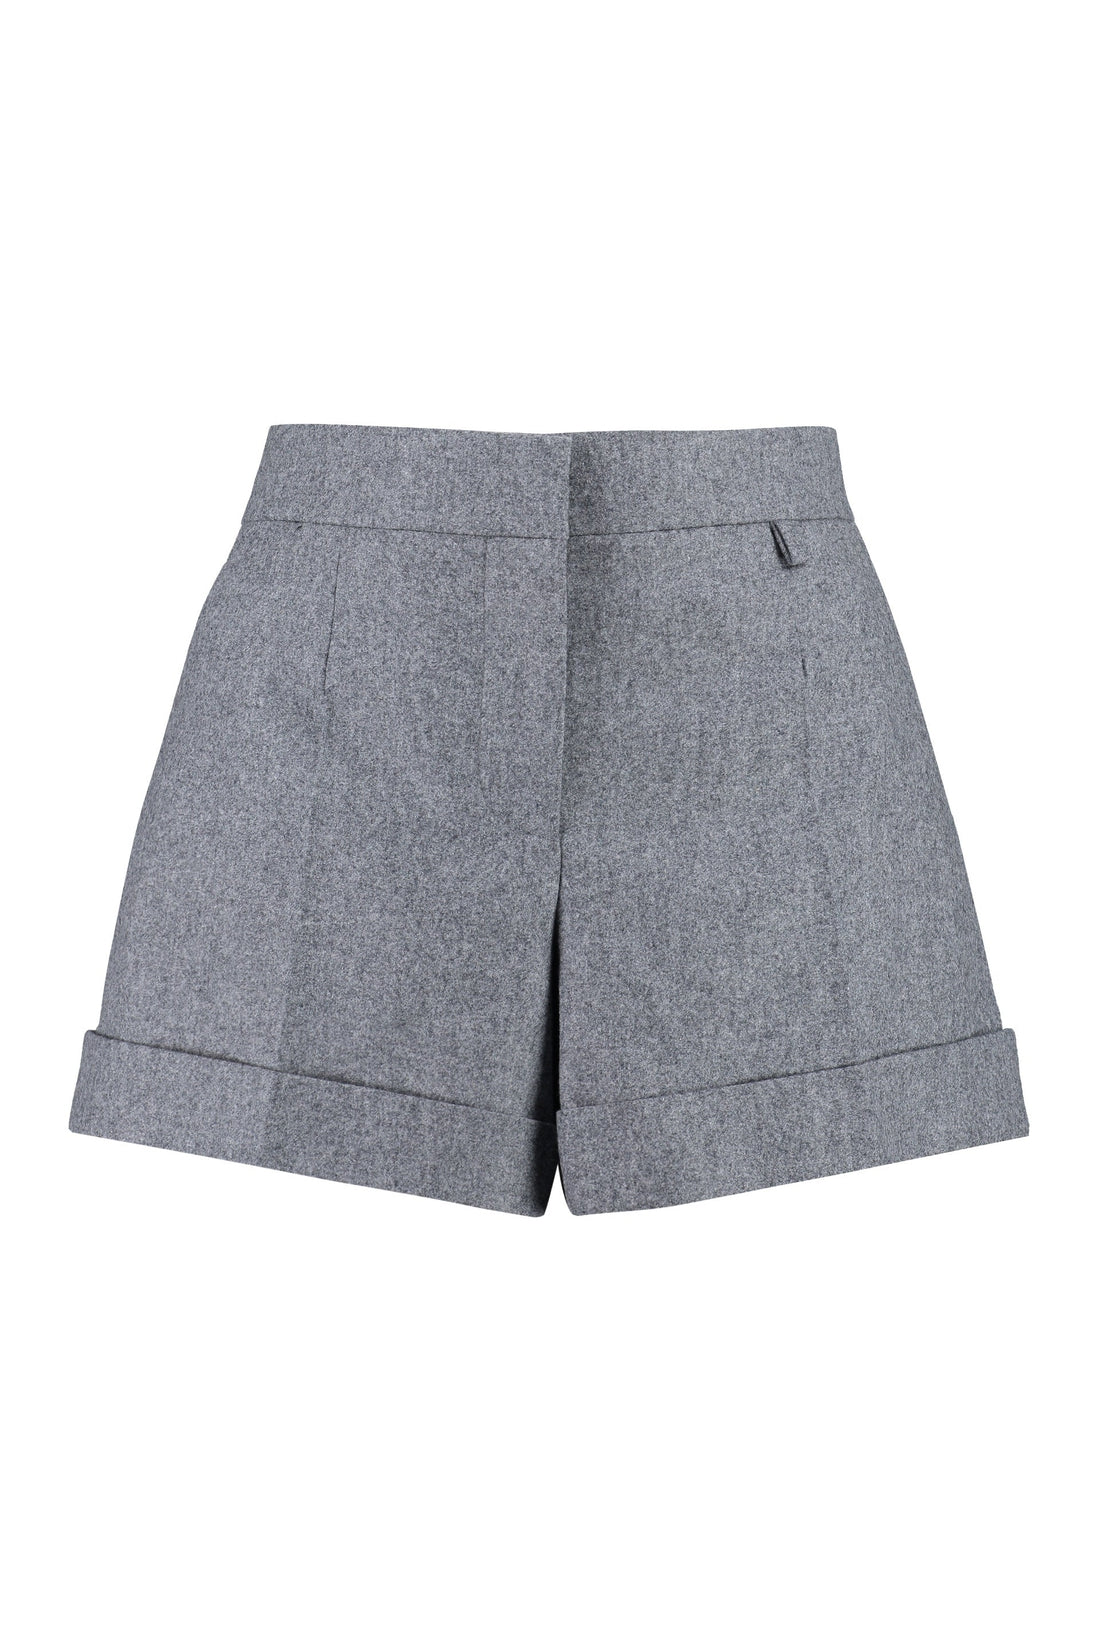 Givenchy-OUTLET-SALE-High waist wool shorts-ARCHIVIST